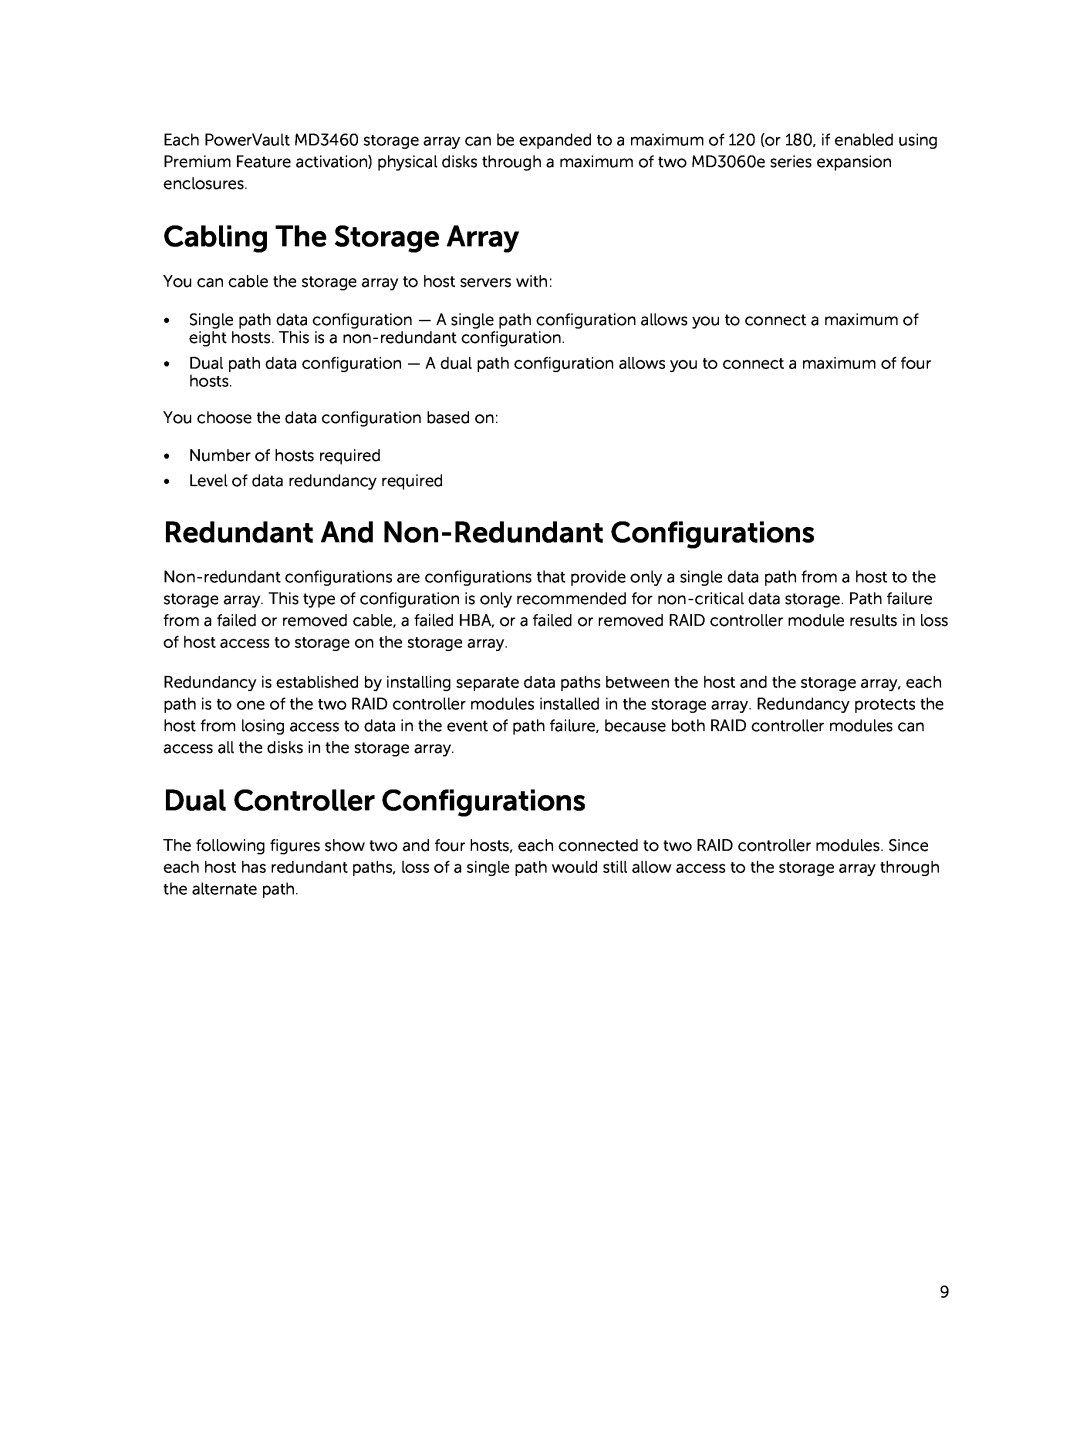 Dell MD3460 manual Cabling The Storage Array, Redundant And Non-Redundant Configurations, Dual Controller Configurations 